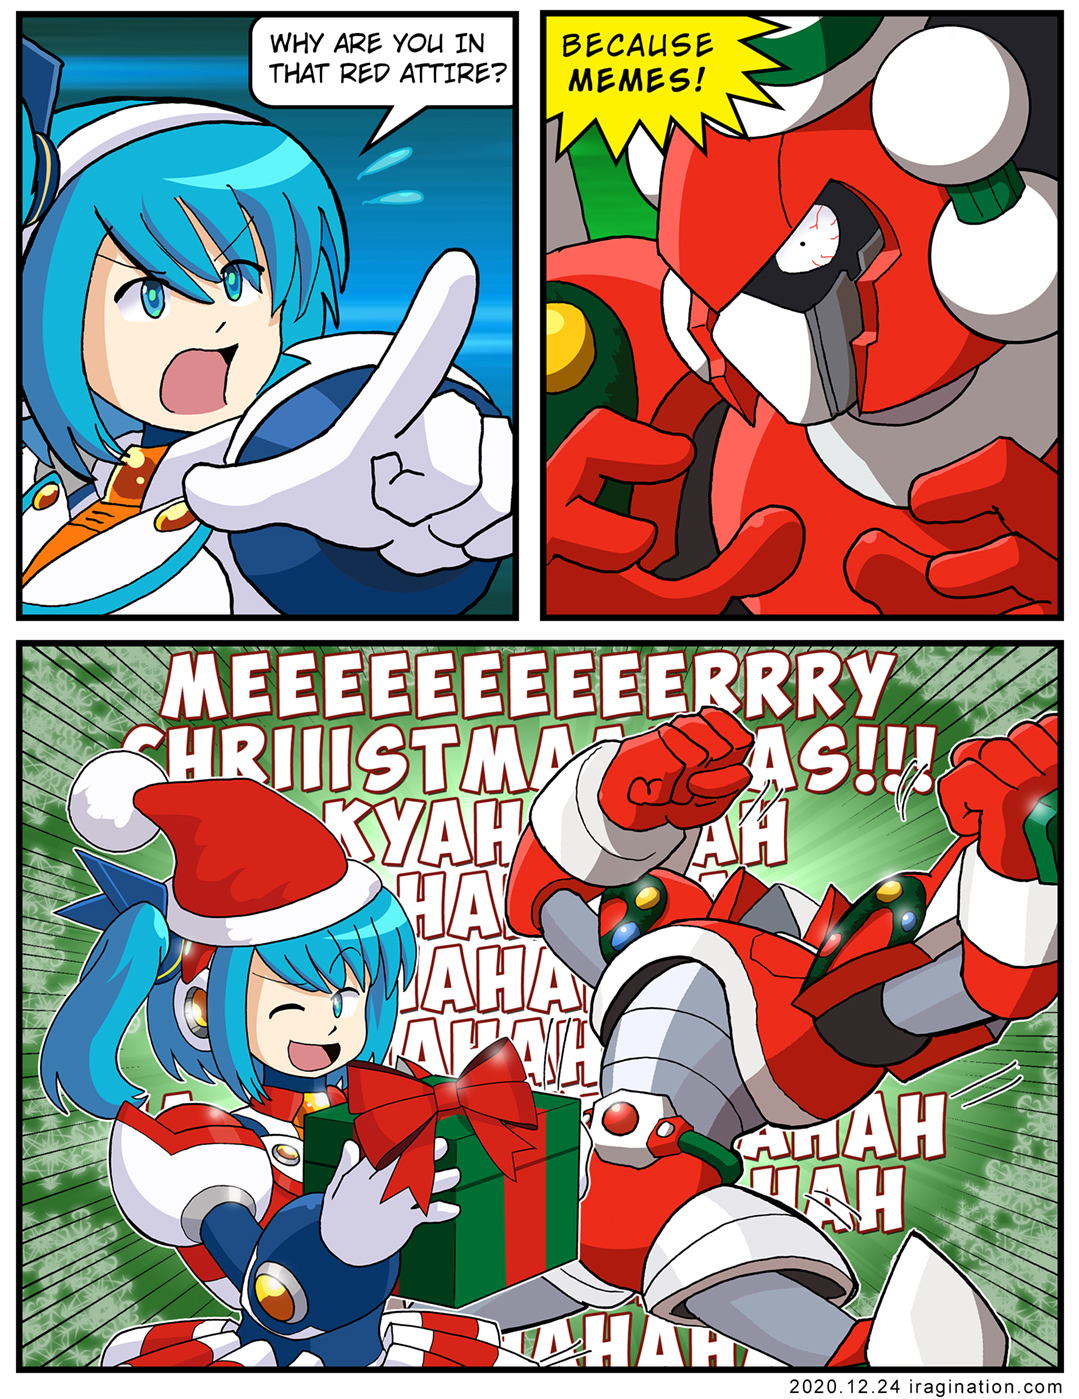 Christmas Bit - Rockman X DiVE
Hi guys, I know everyone must be busy, so let's keep it short.

The Christmas Bit meme is based on the Rockman X3 manga. You can read the pertinent chapter [url=https://mangadex.org/chapter/216840/1]here[/url].

There was a reference to [url=https://www.facebook.com/CAPCOM.RXD/videos/301121214661411]Christmas Bit in Rockman X DiVE[/url]. The good part is that RiCO made the pressing question of why Bit would wear such an outfit.

He gave some in-universe answer that I think it was meant to be serious. So, I decided to make my own version with the only answer I thought was reasonable for this scenario. I mean, come on, if you are going to do a homage to some meme, go all the way in!

You also have got to admire RiCO's willingness to take part in all our holidays!

Merry Christmas!

Keywords: bit rico